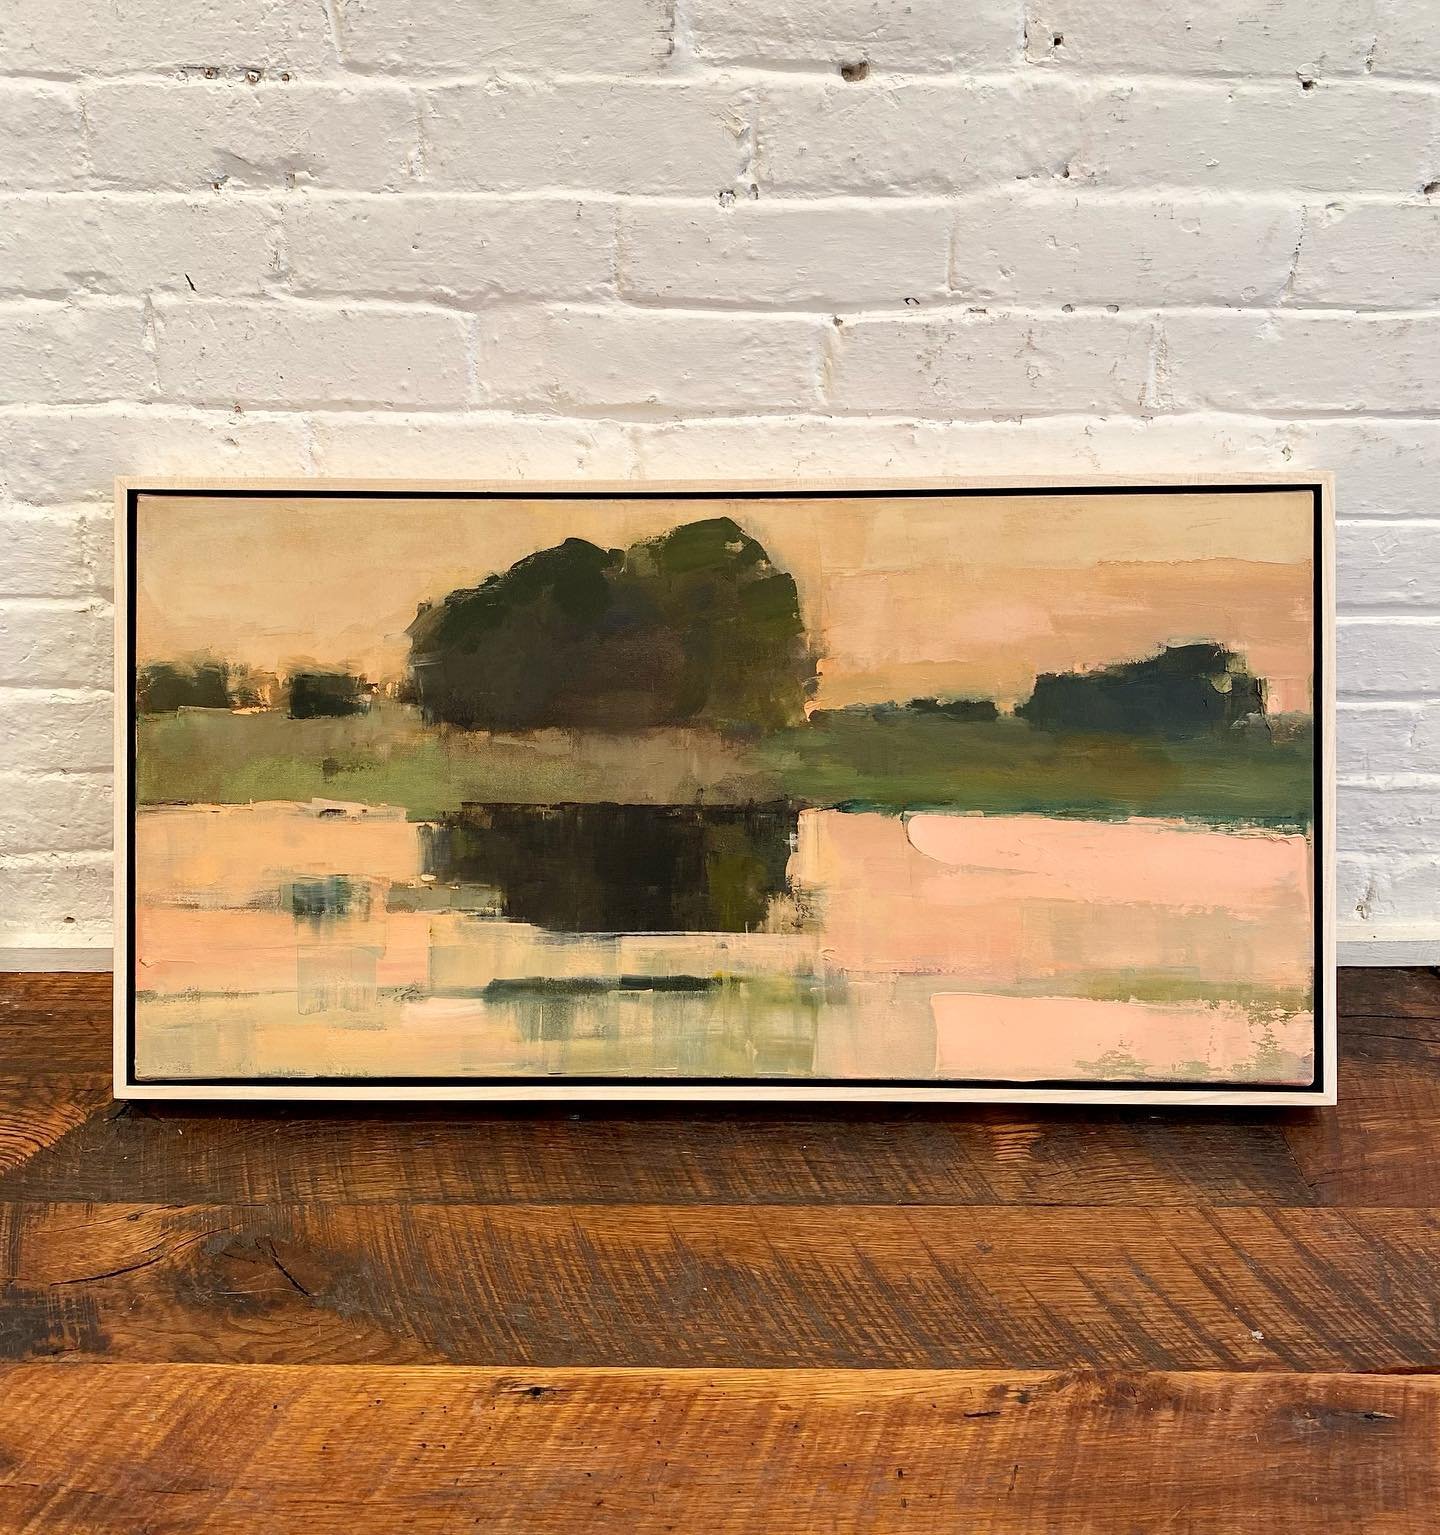 &lsquo;Sundowner&rsquo; for Susanah&rsquo;s solo show &ldquo;Here &amp; There&rdquo;. The paintings take us to Botswana, the Adirondacks, the Elizabeth Islands, and beyond. A beautiful show that opens tomorrow night from 6-8pm!

#painting #landscape 